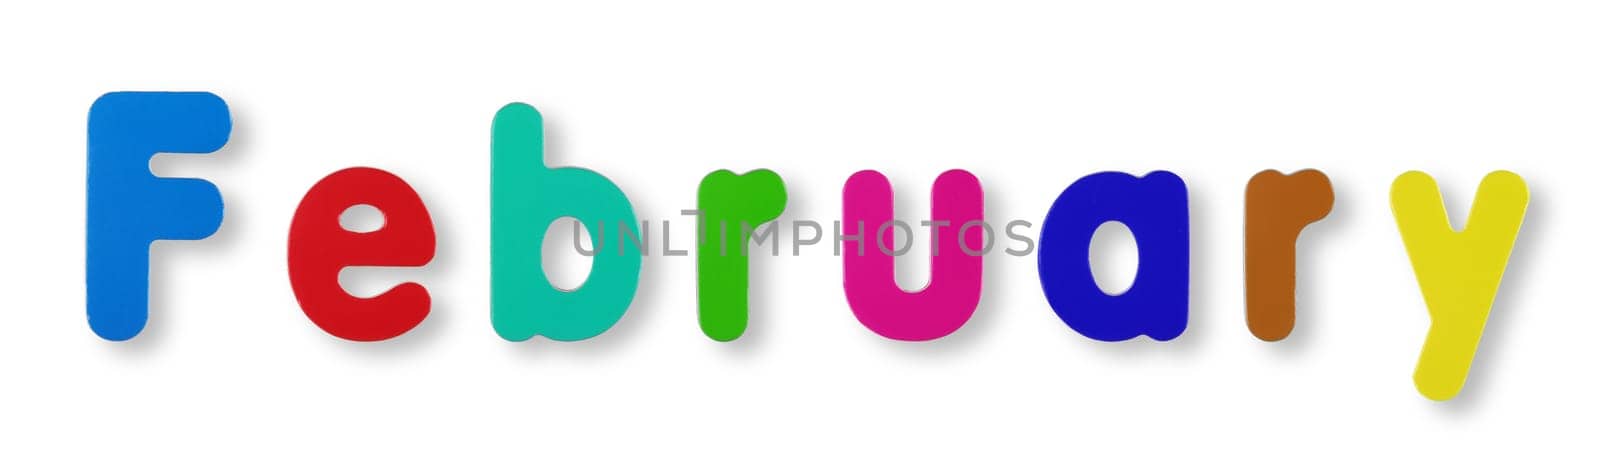 February word in coloured magnetic letters by VivacityImages